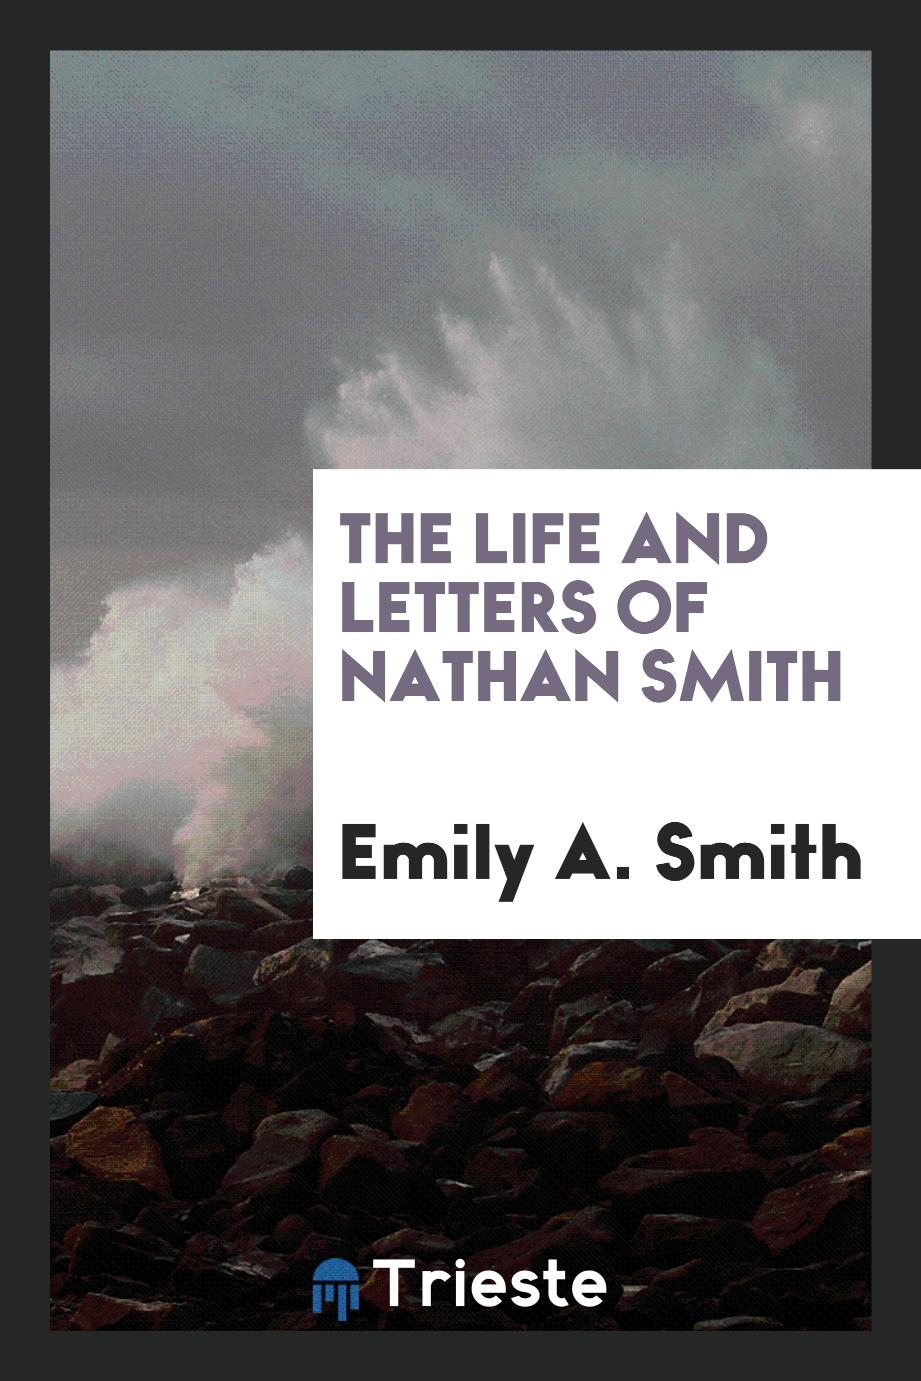 The life and letters of Nathan Smith